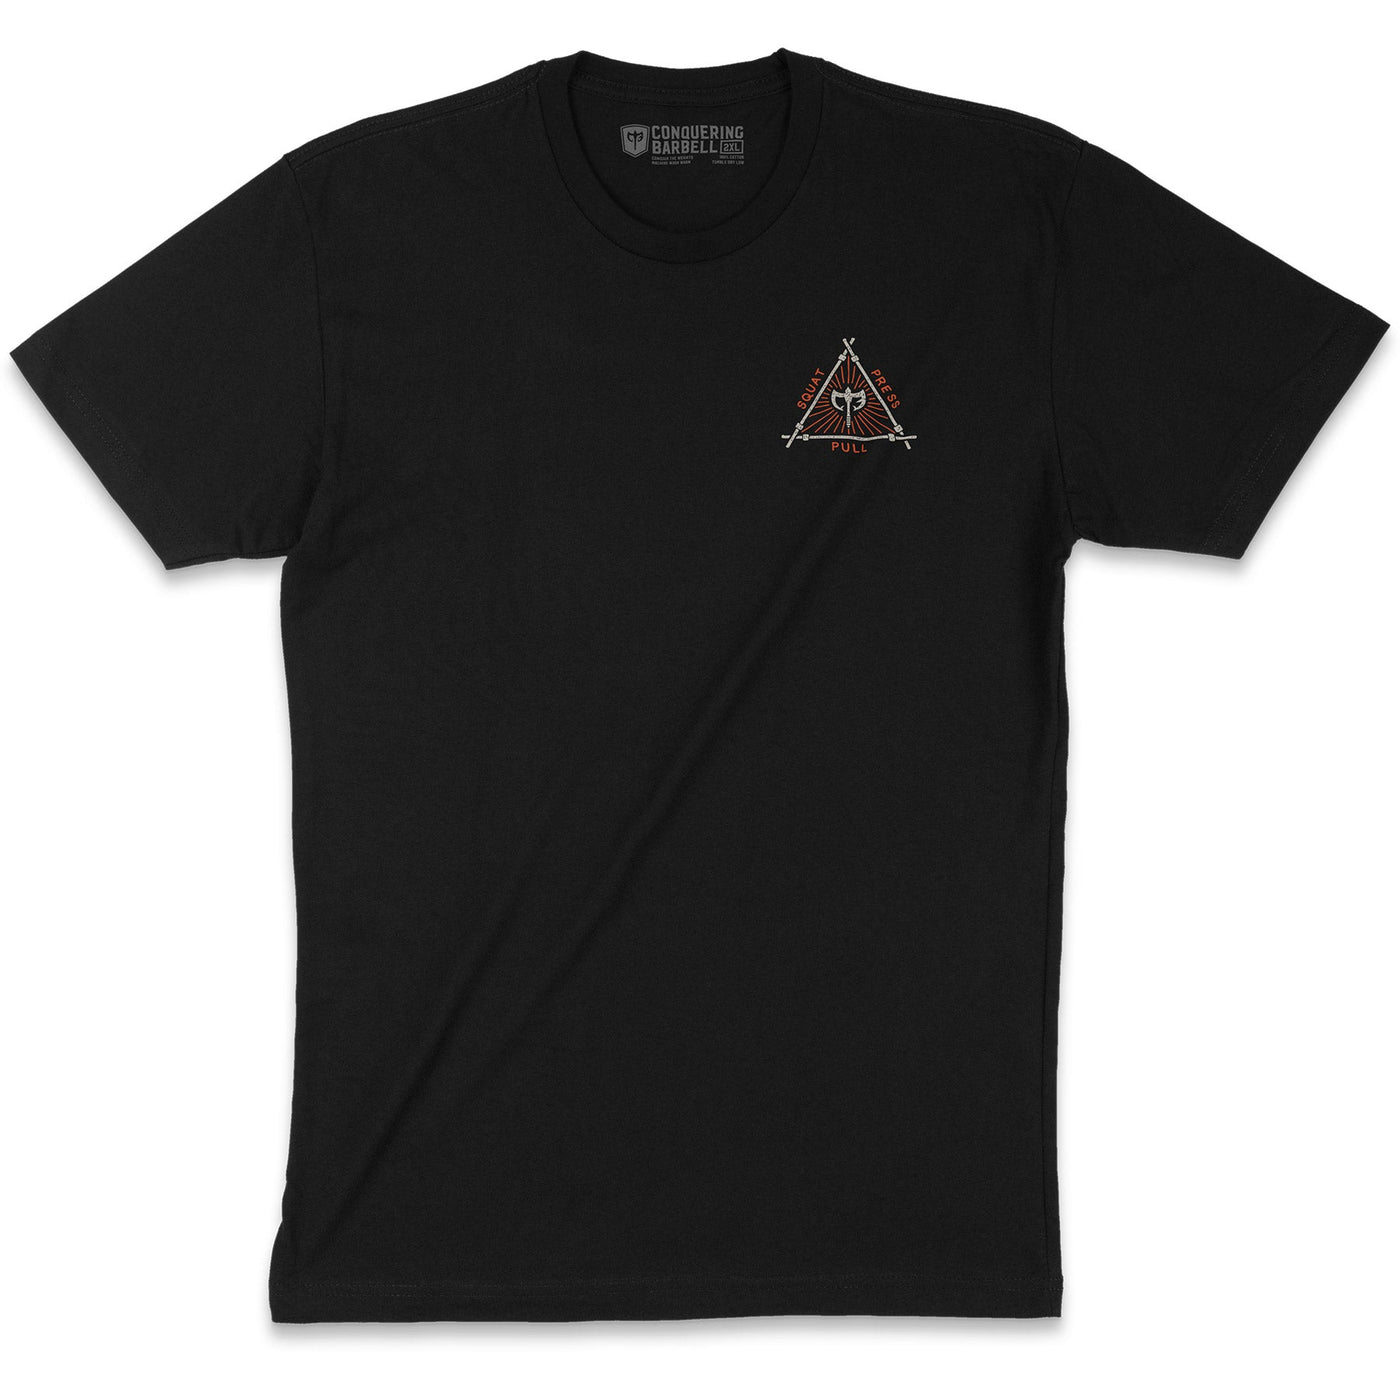 The Balance of Power - Black Tee - Conquering Barbell